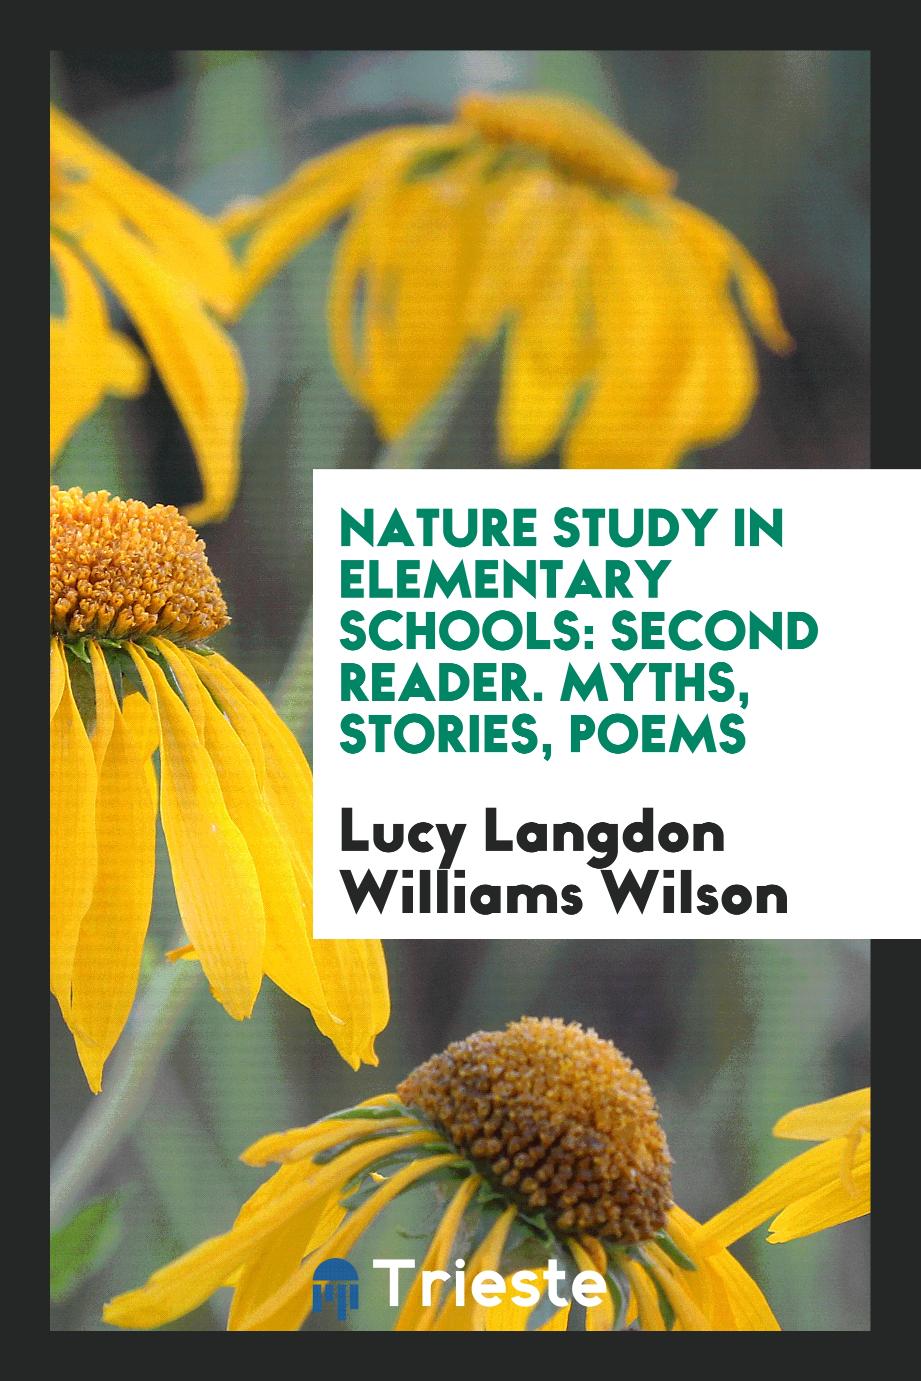 Nature Study in Elementary Schools: Second Reader. Myths, Stories, Poems